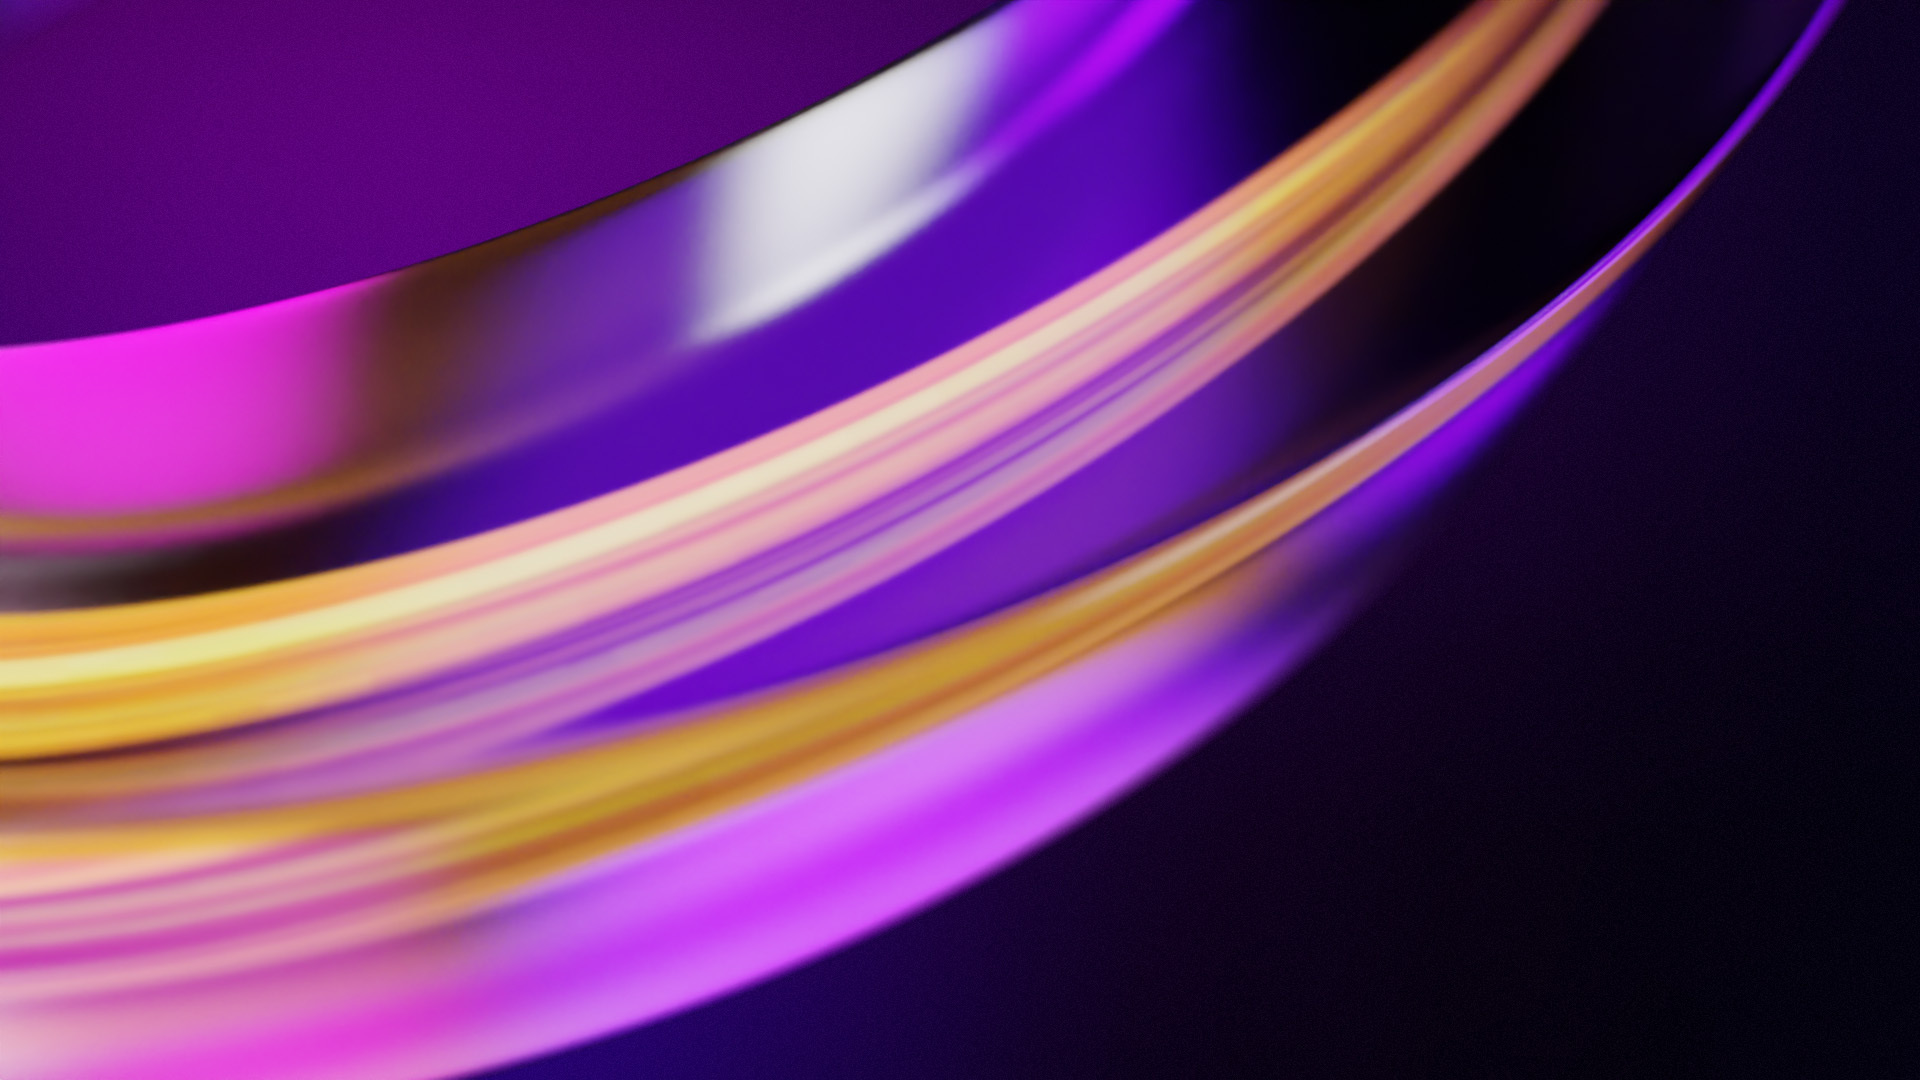 Segment of infinity loop with a pulse of purple energy.